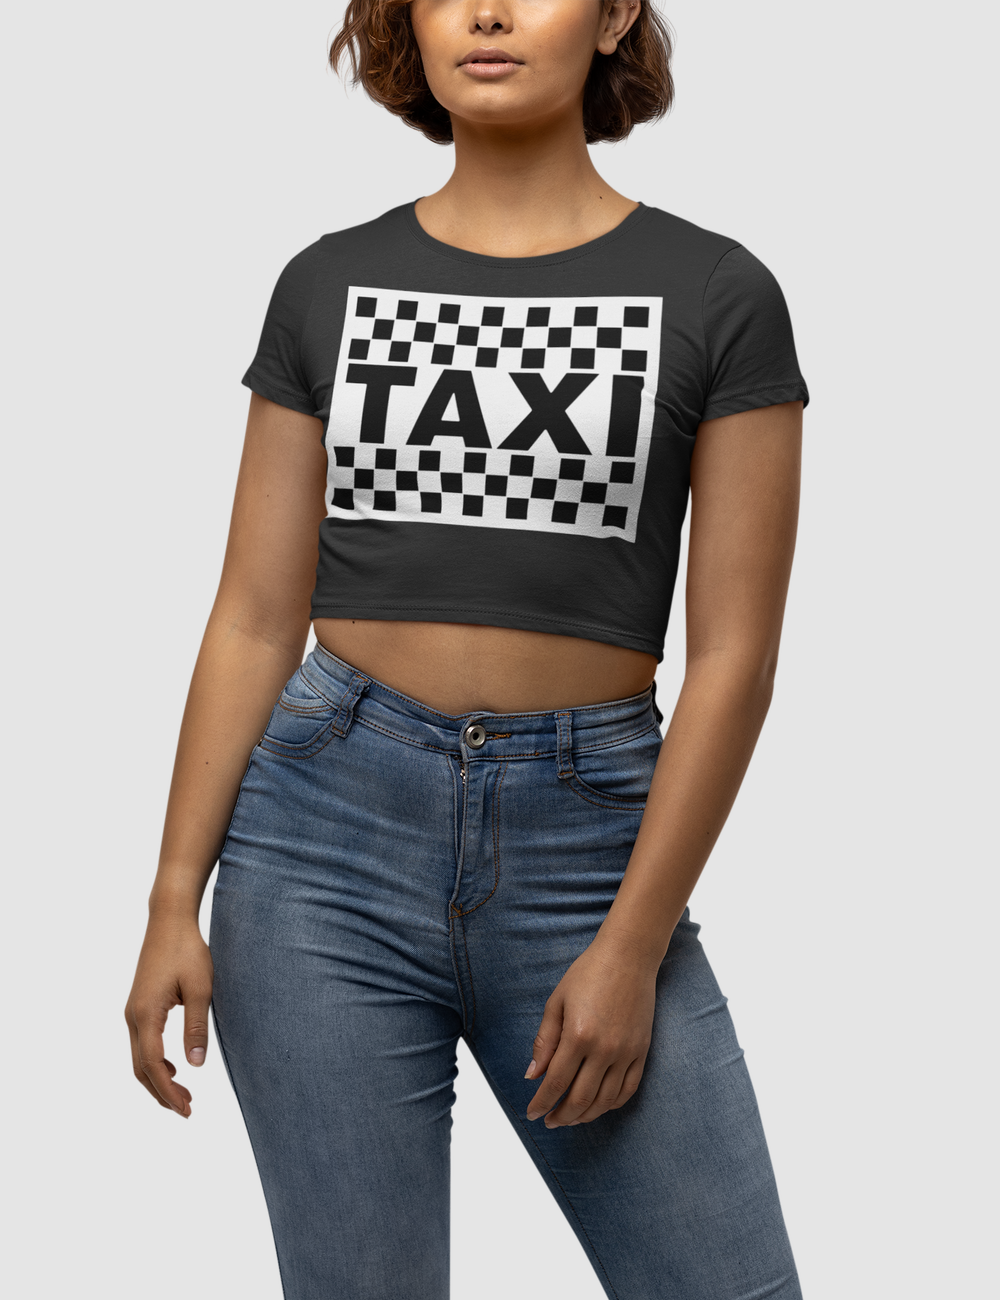 Classic Taxi Sign Women's Fitted Crop Top T-Shirt OniTakai